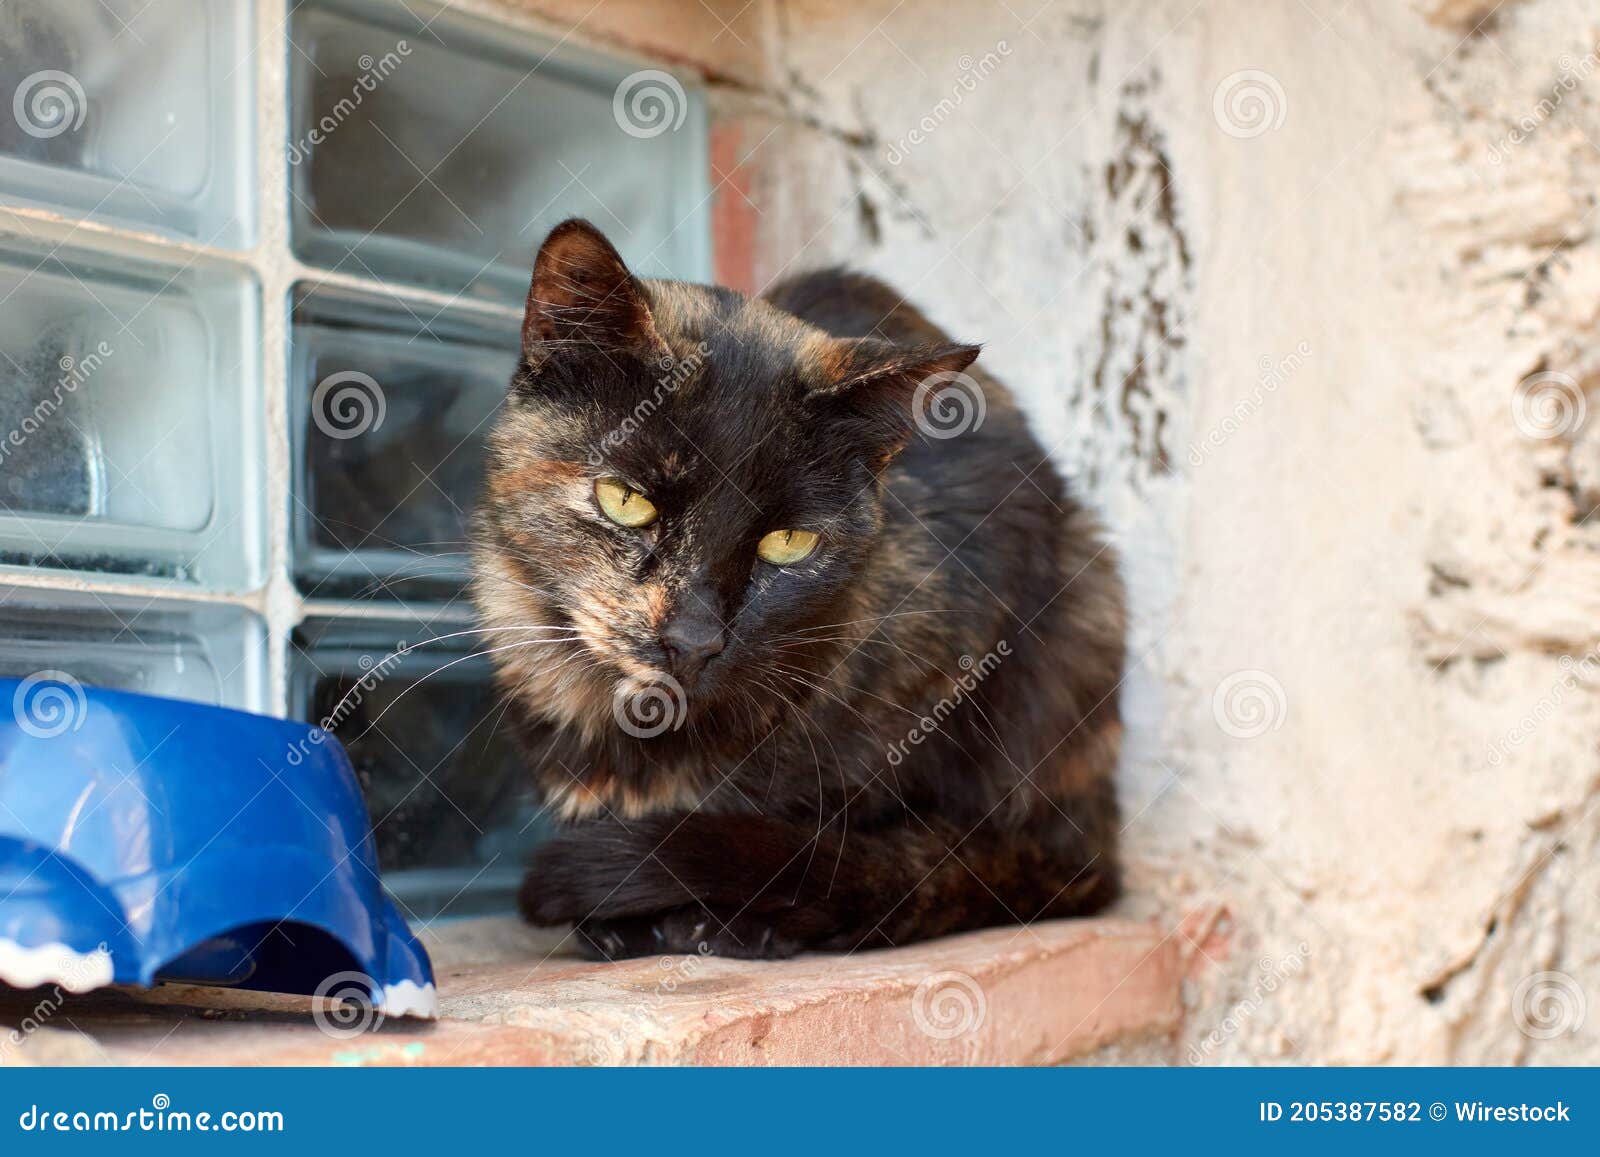 Cat Shaking Head Seizure - Cat Meme Stock Pictures and Photos